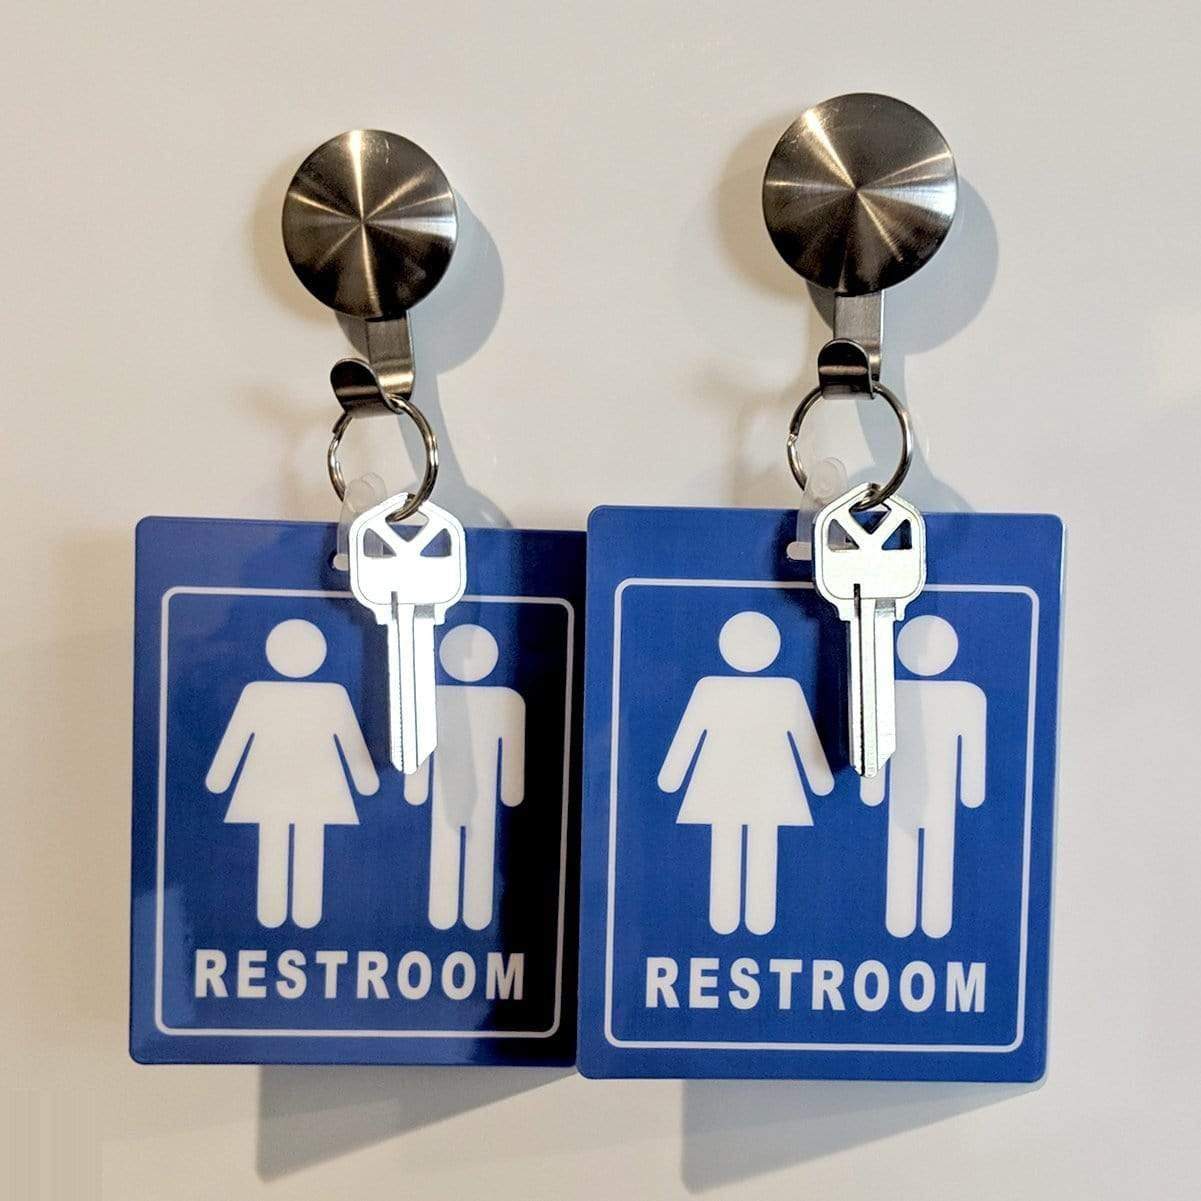 2 Pack Unisex Restroom Pass Keychain - Bathroom Tag with Key Chain Ring - Heavy Duty Large Passes for Unisex & Family Restrooms with Key Holder (Sold in 2 Pack) (SPID-9840-Blue) SPID-9840-BLUE-Q2